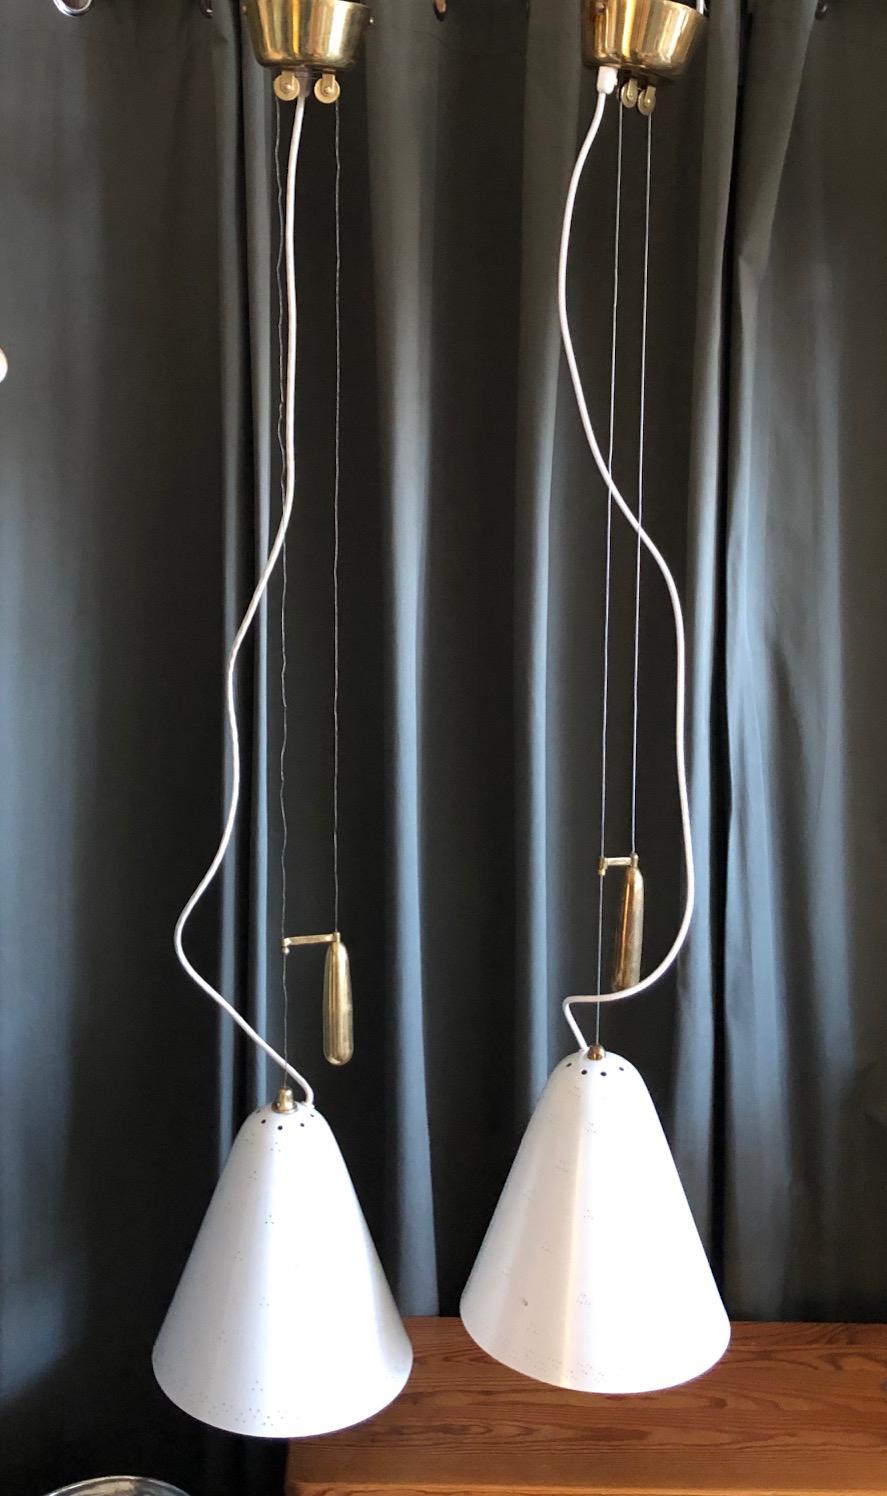 A pair of counterweight adjustable ceiling lamps, designed by Paavo Tynell for Idman. Model 1942. Painted perforated aluminum shades with polished brass counterweight details. Marked Idman. 
The shade dimensions: 11' height; 10' diameter. Drop 47